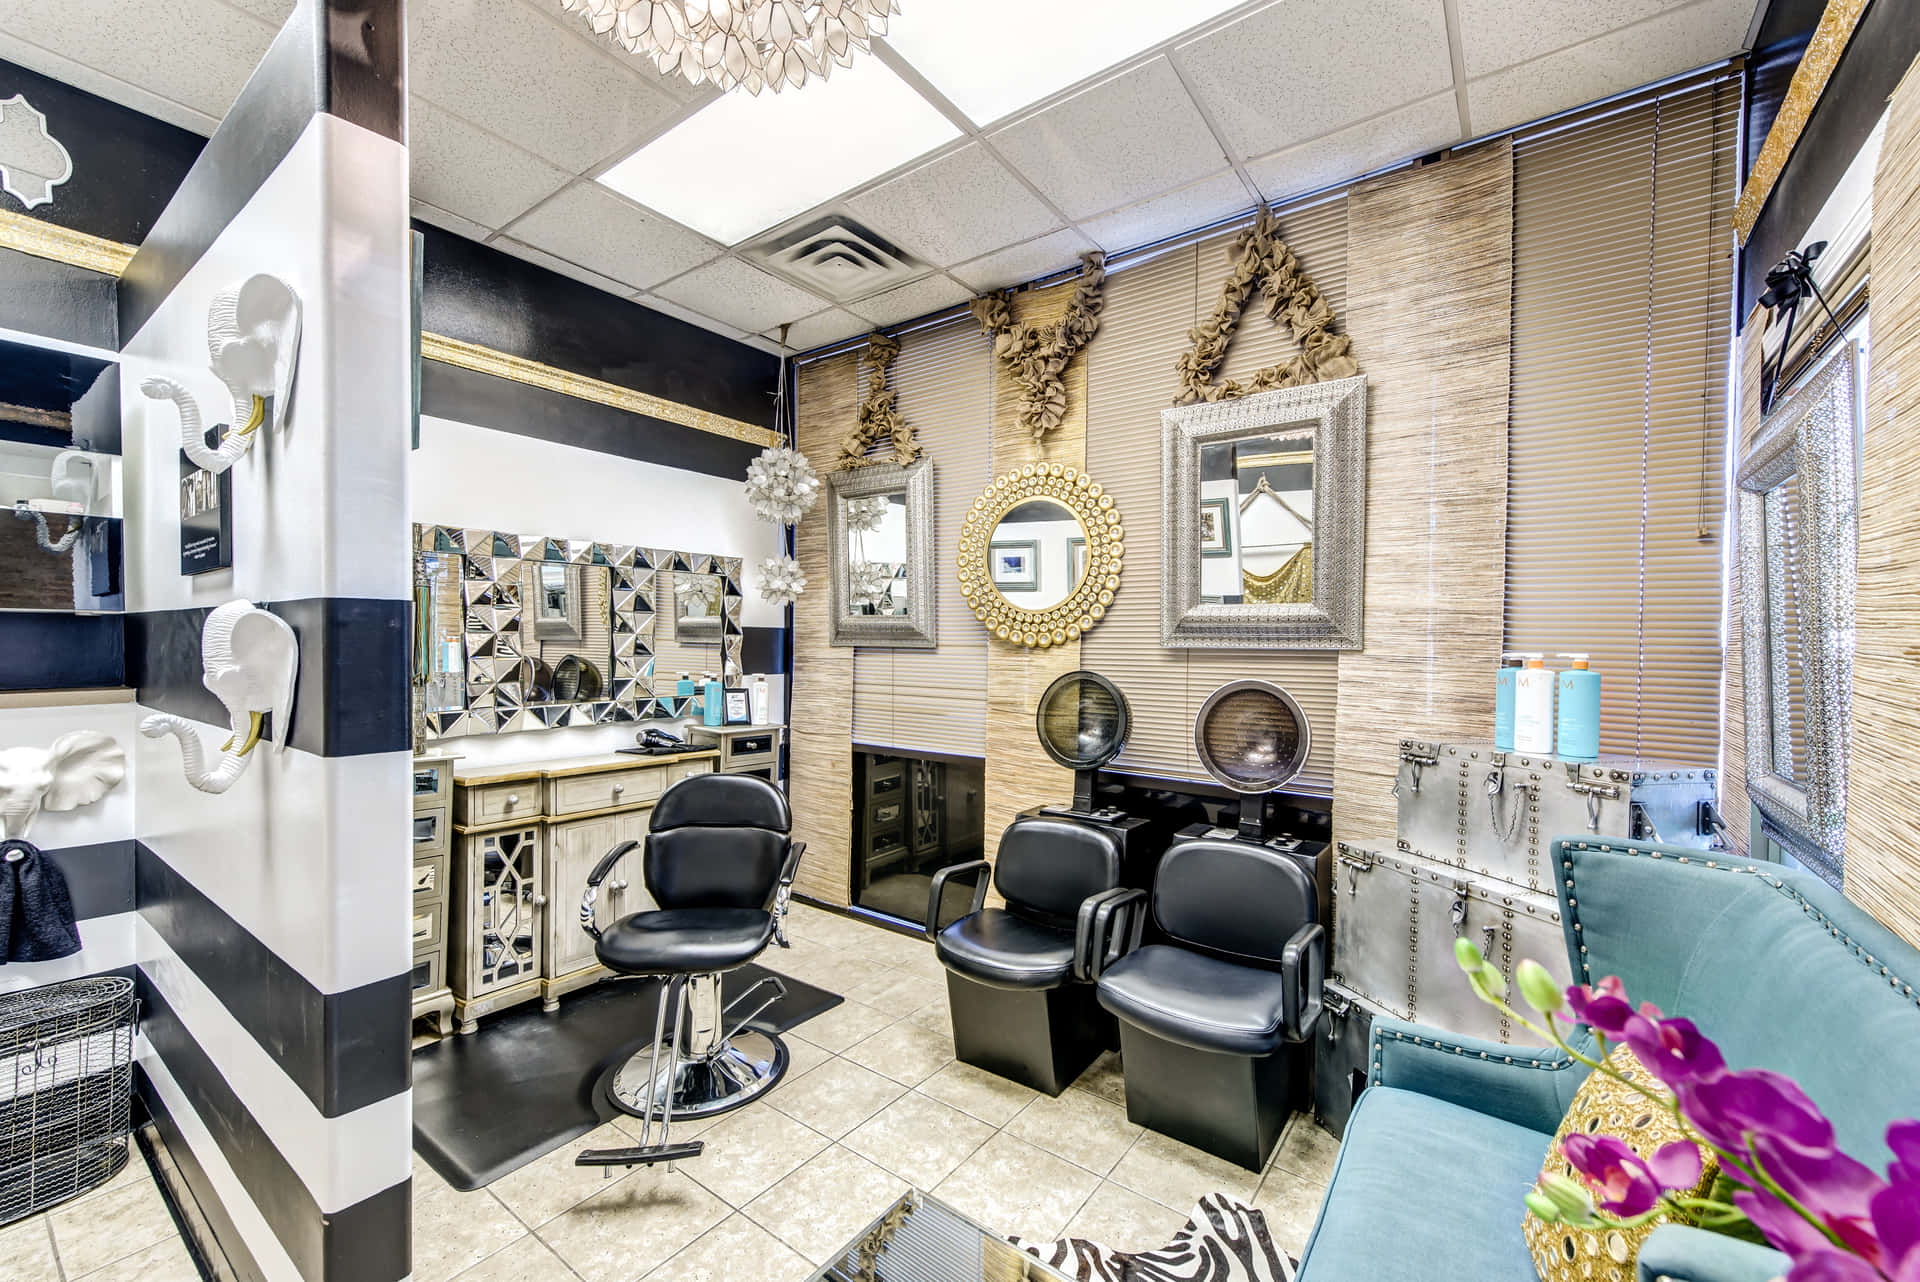 Pampering made easy with a visit to your local Hair Salon!